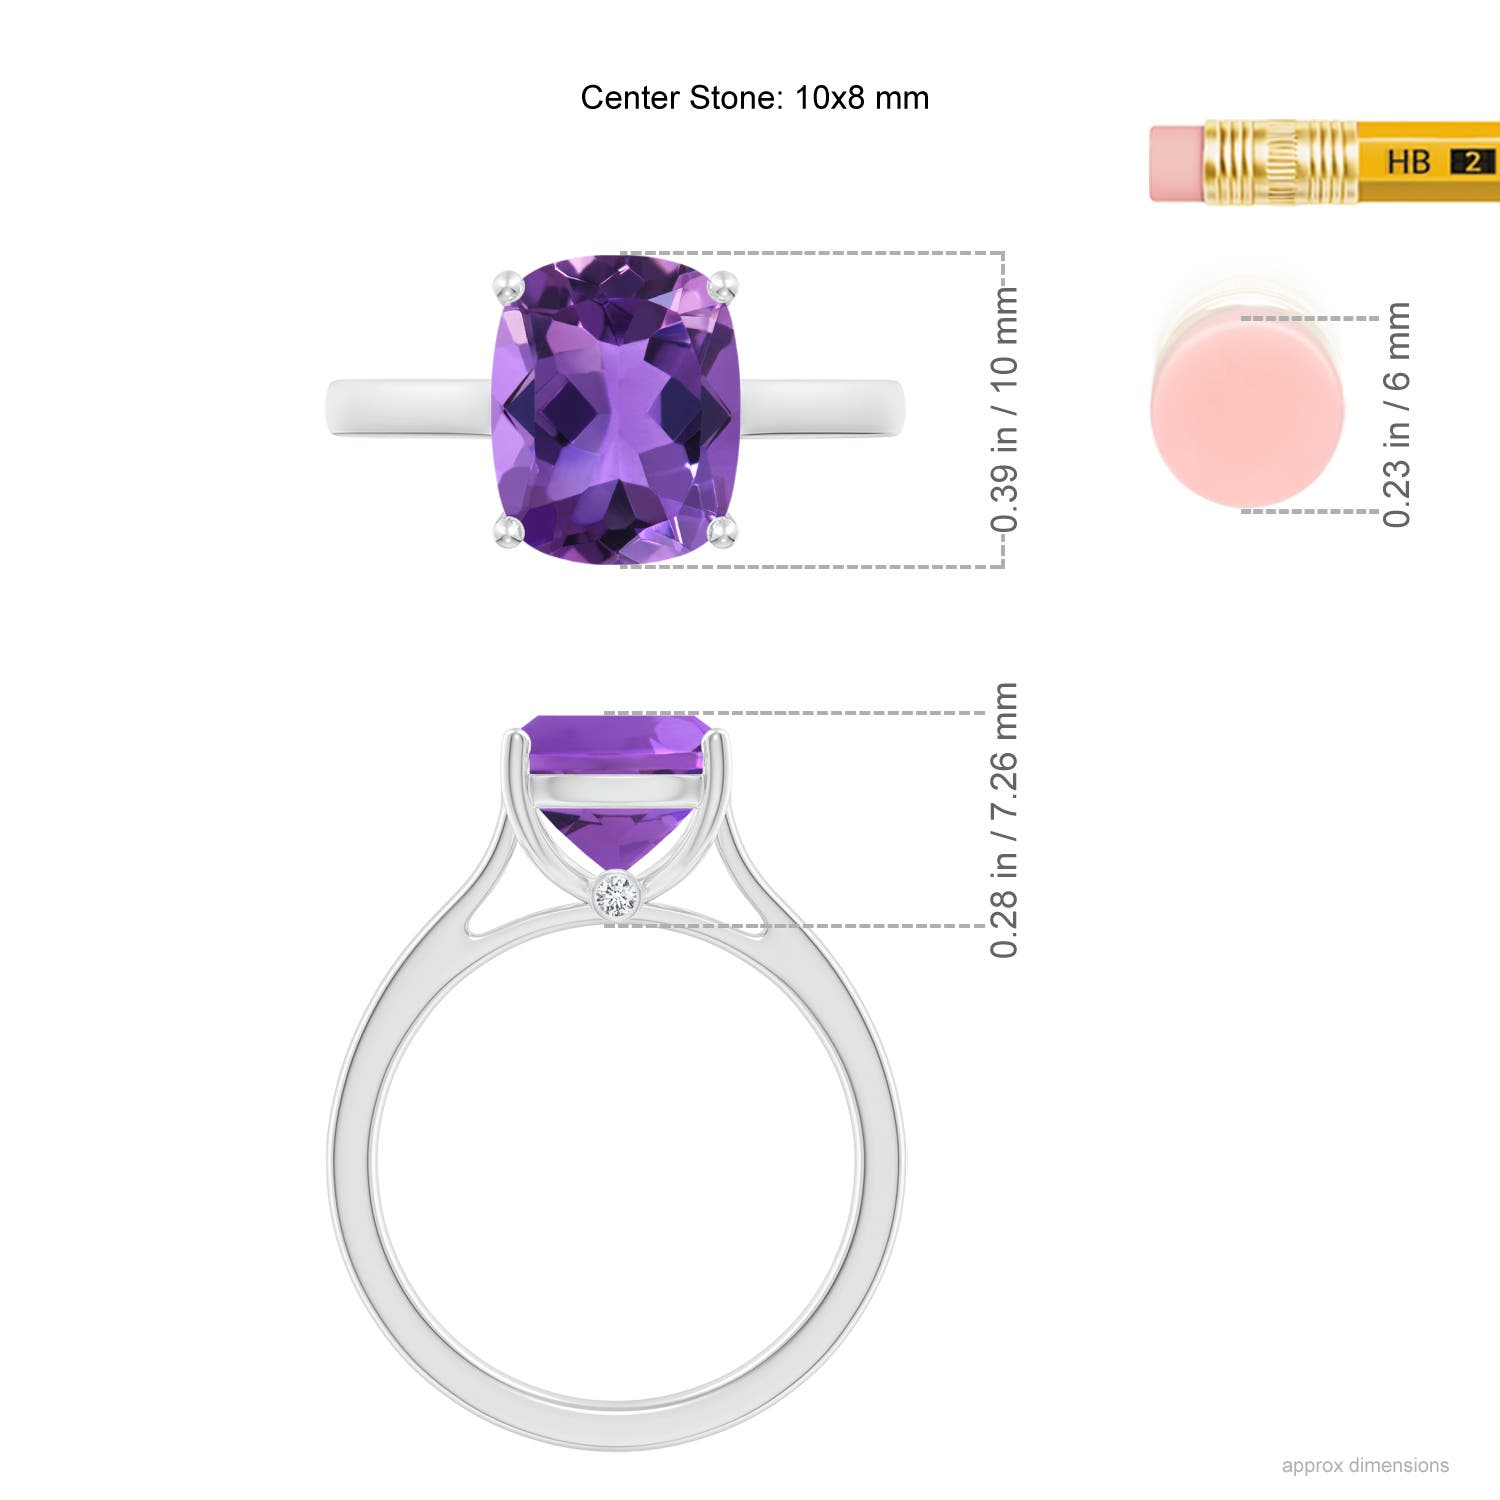 AAA - Amethyst / 2.72 CT / 14 KT White Gold